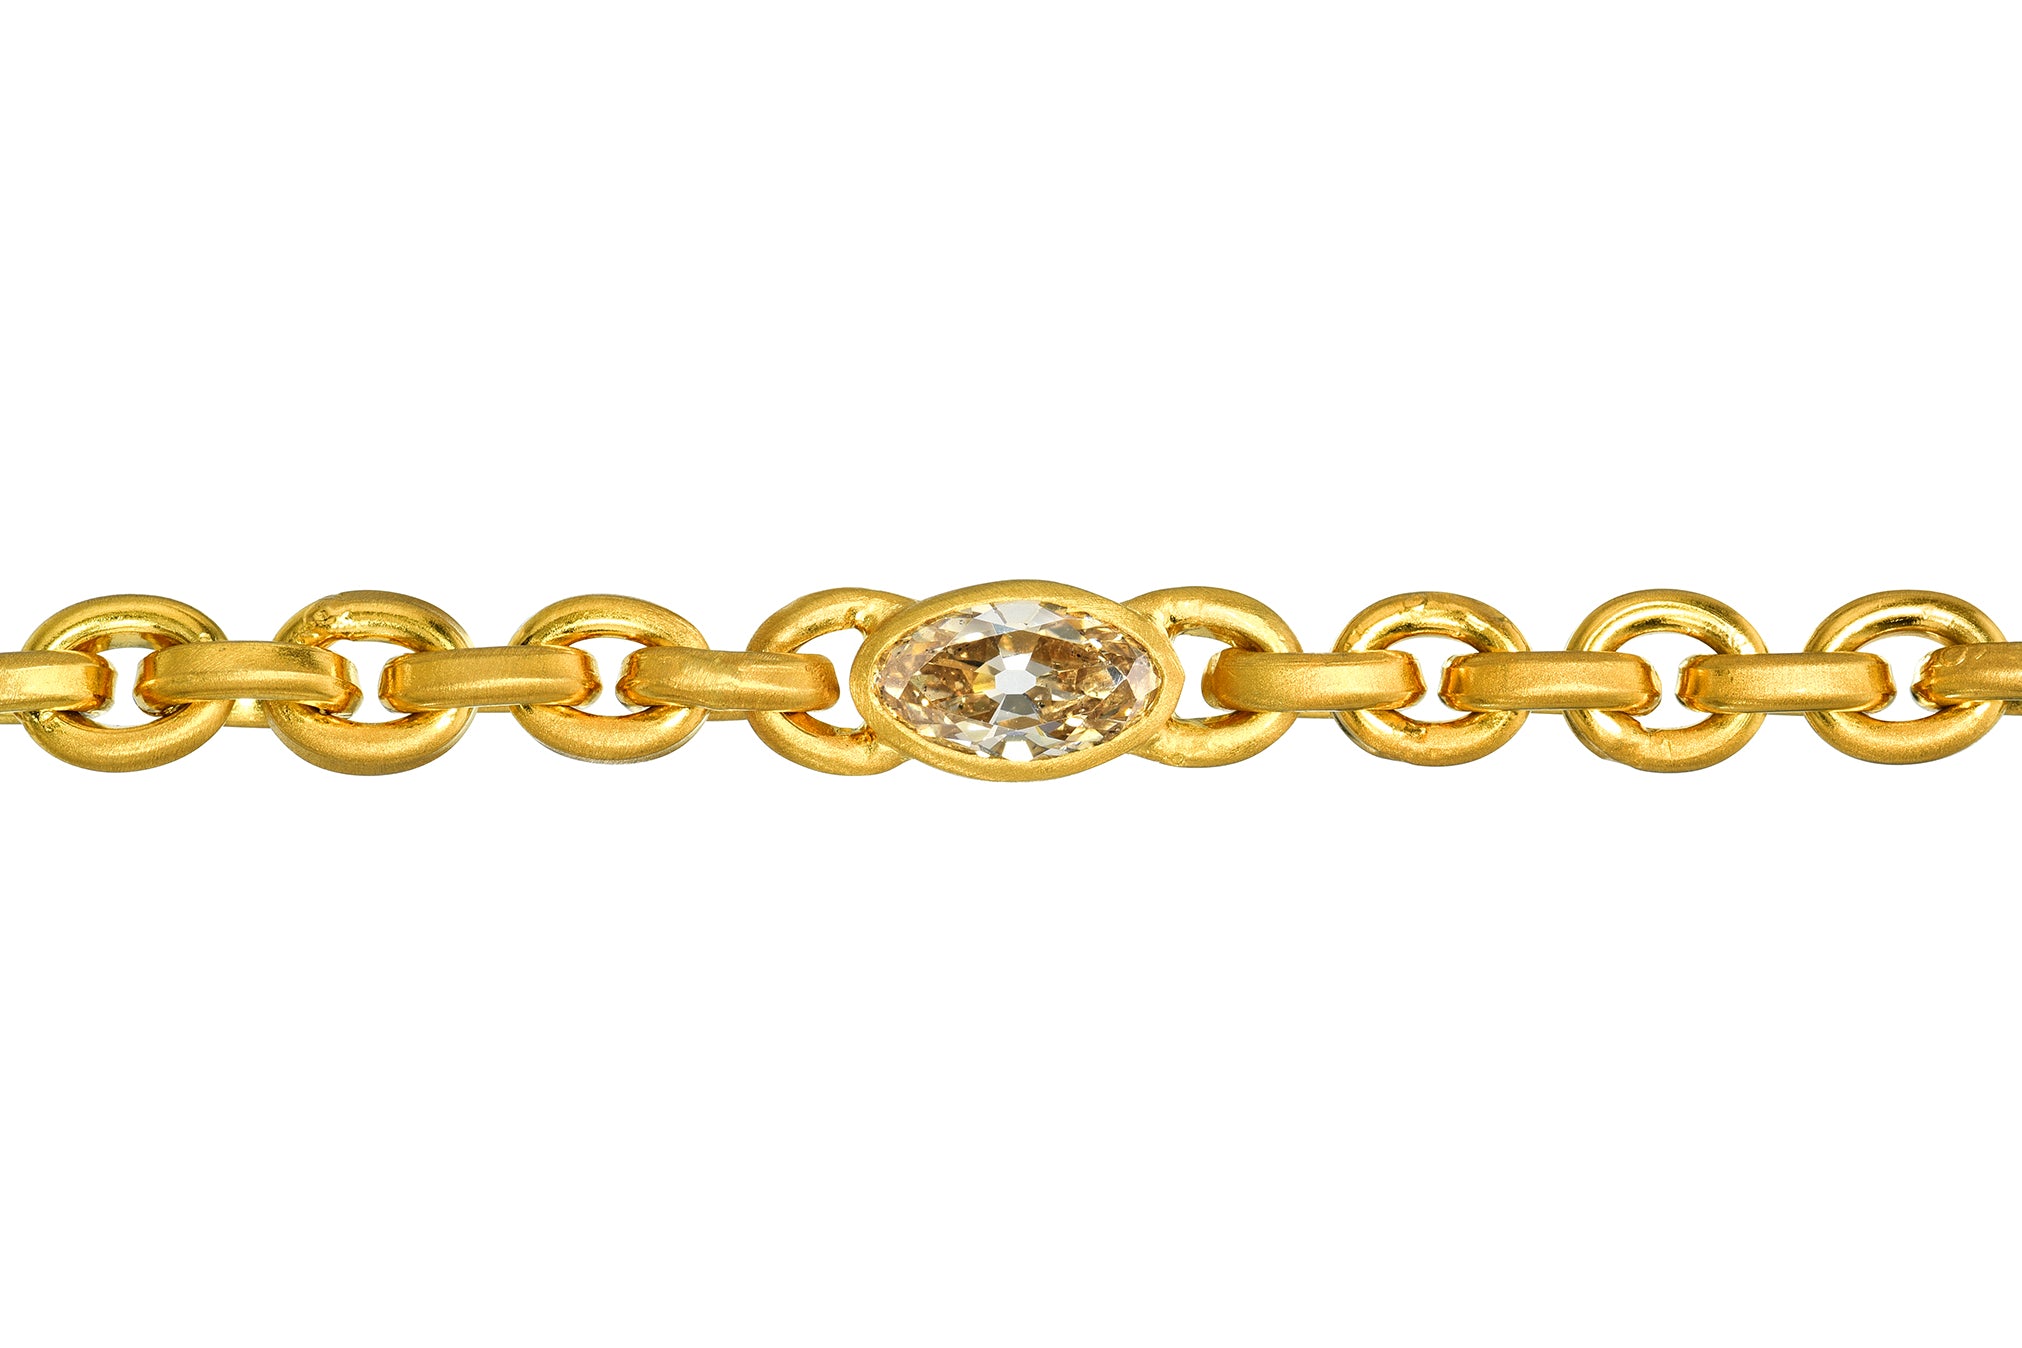 Darius Jewels one of a kind antique moval diamond signature oversized signature chain braclet